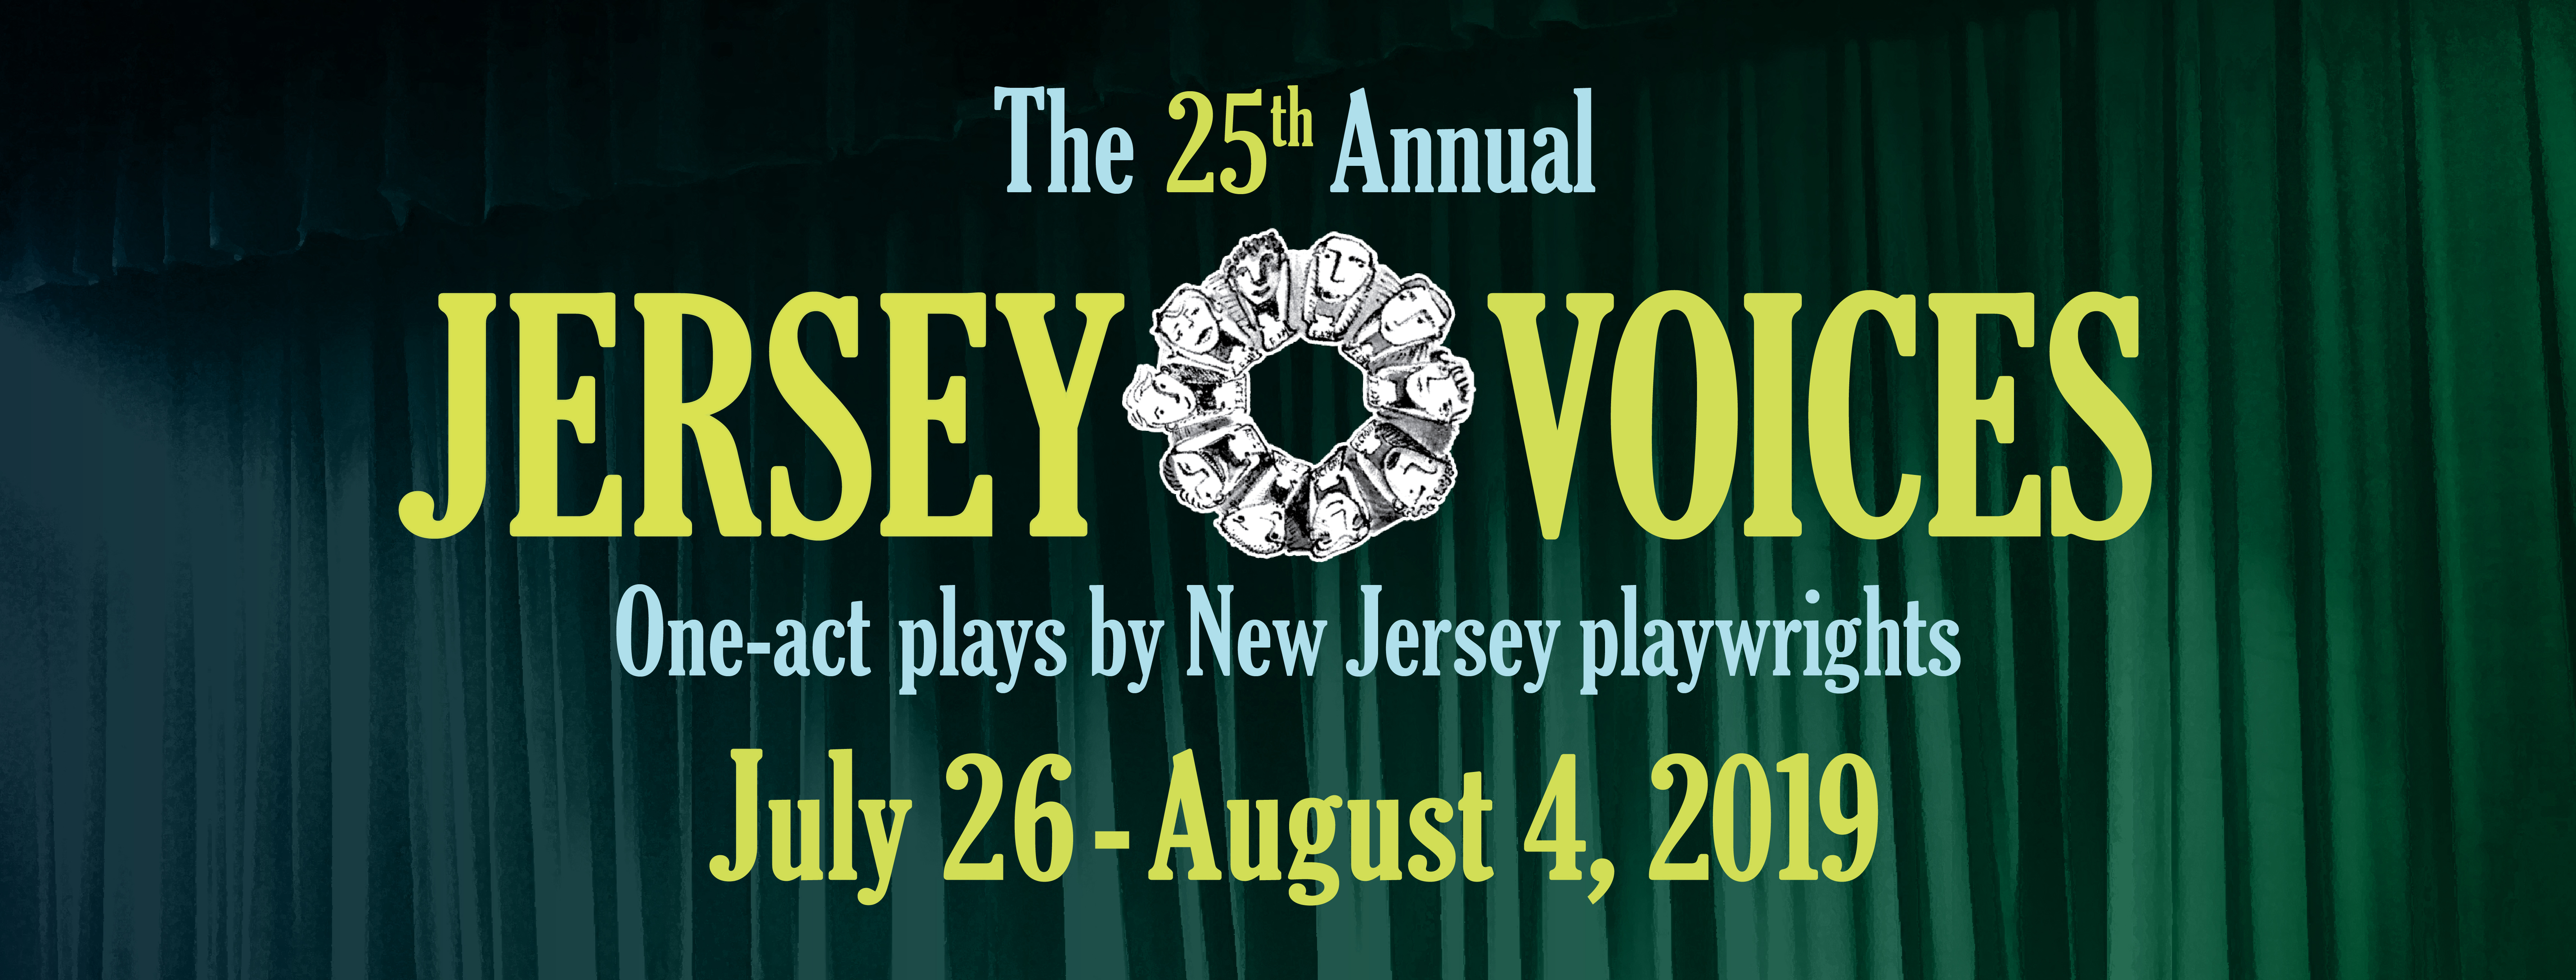 Jersey Voices 2019